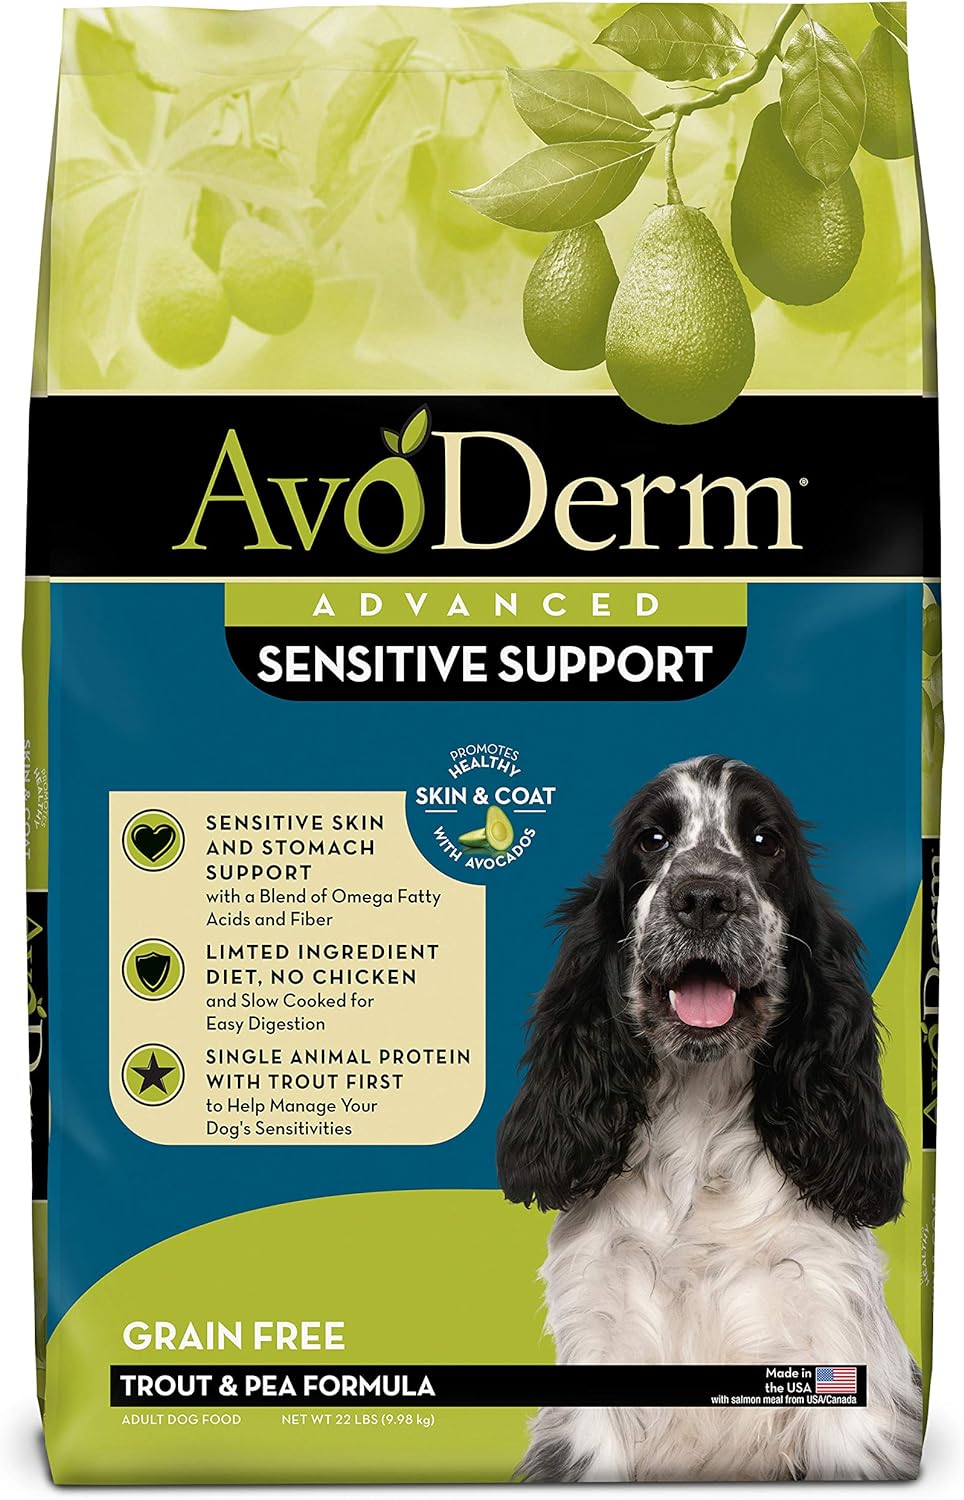 AvoDerm Advanced Sensitive Support Grain-Free Trout & Pea Formula Dry Dog Food – Gallery Image 1